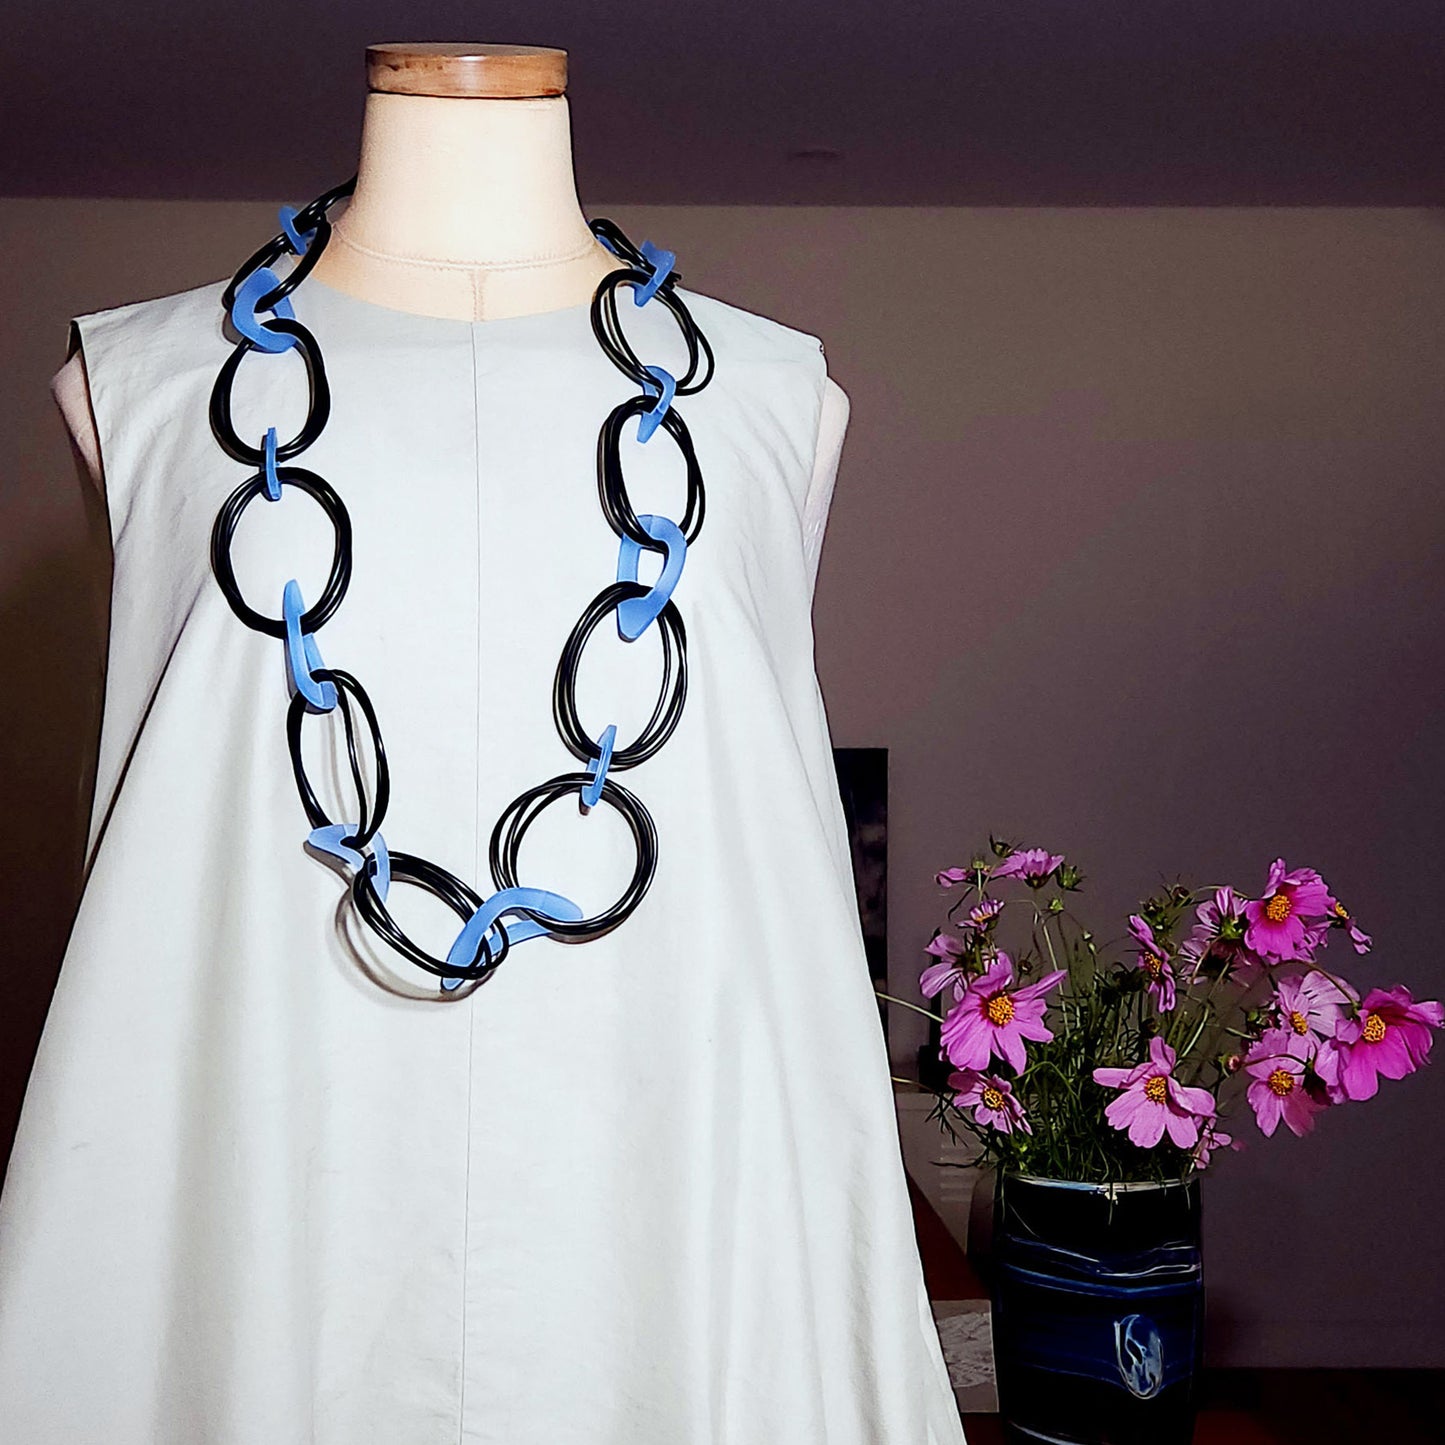 Blue Shapes necklace by Frank Ideas